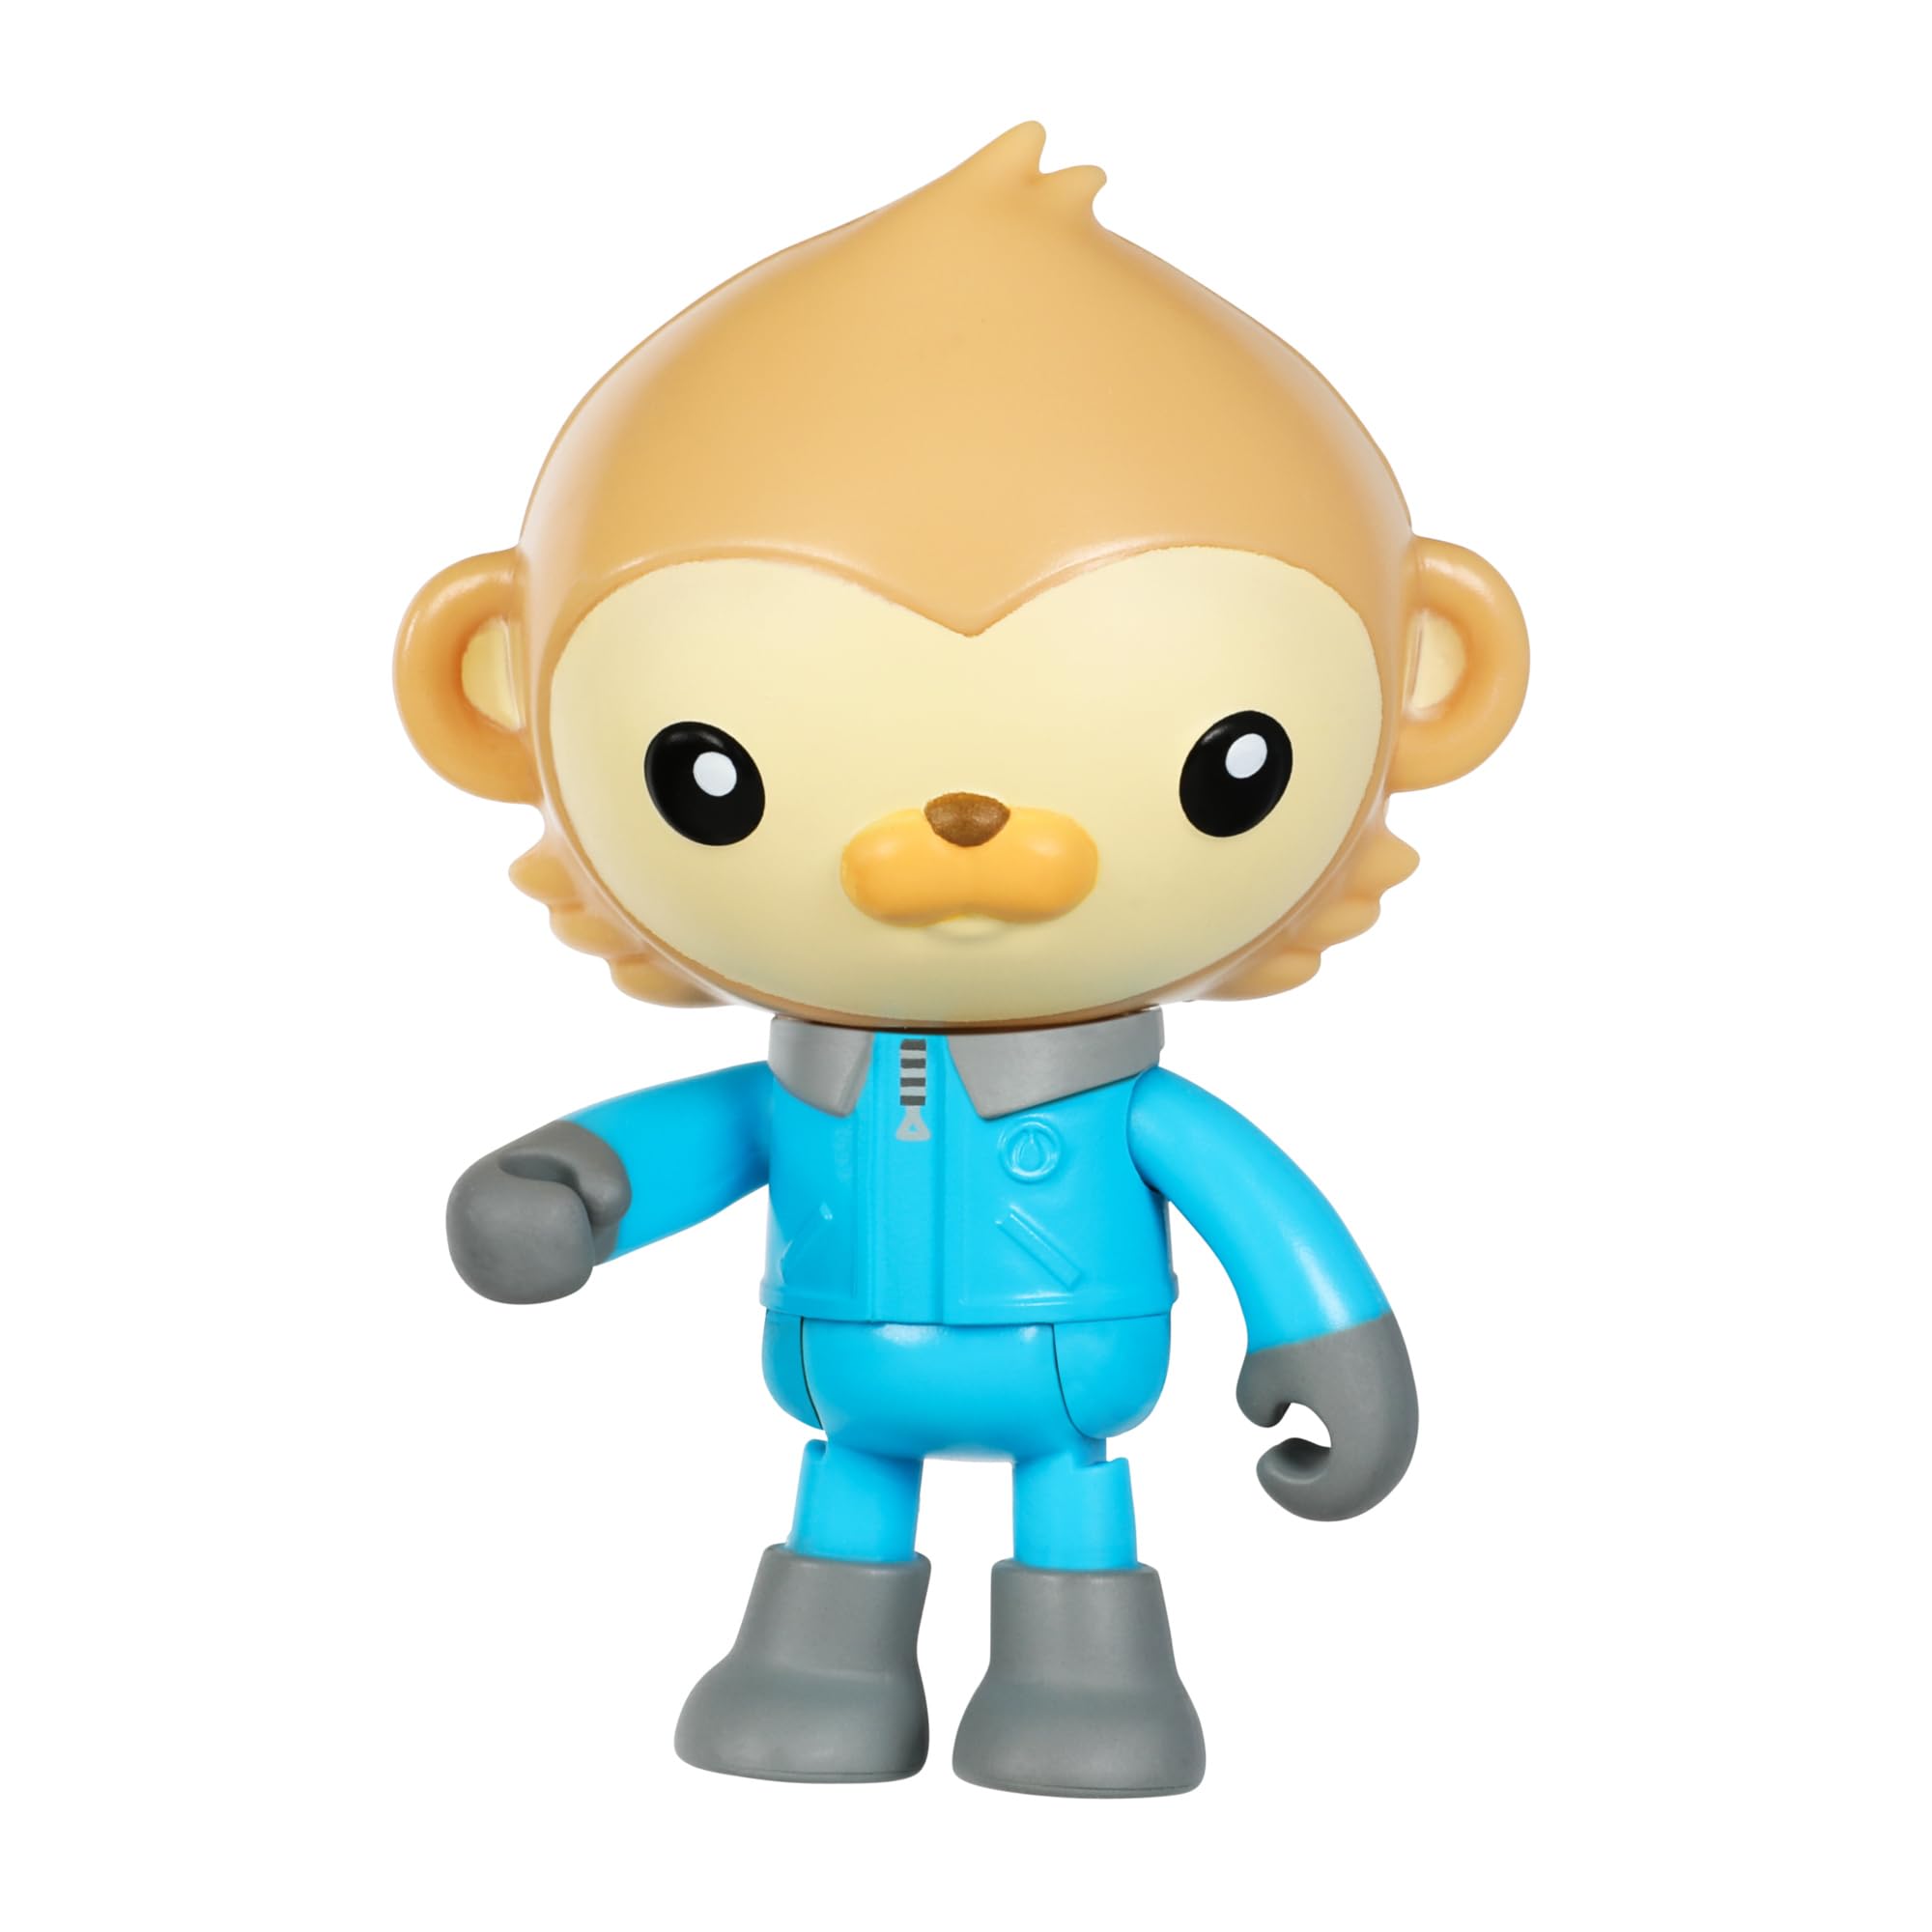 Octonauts Above & Beyond, Toy Figure 5 Pack. Exclusive Arctic Theme, Includes Captain Barnacles, Kwazii, Paani, Shellington and Peso | Amazon Exclusive